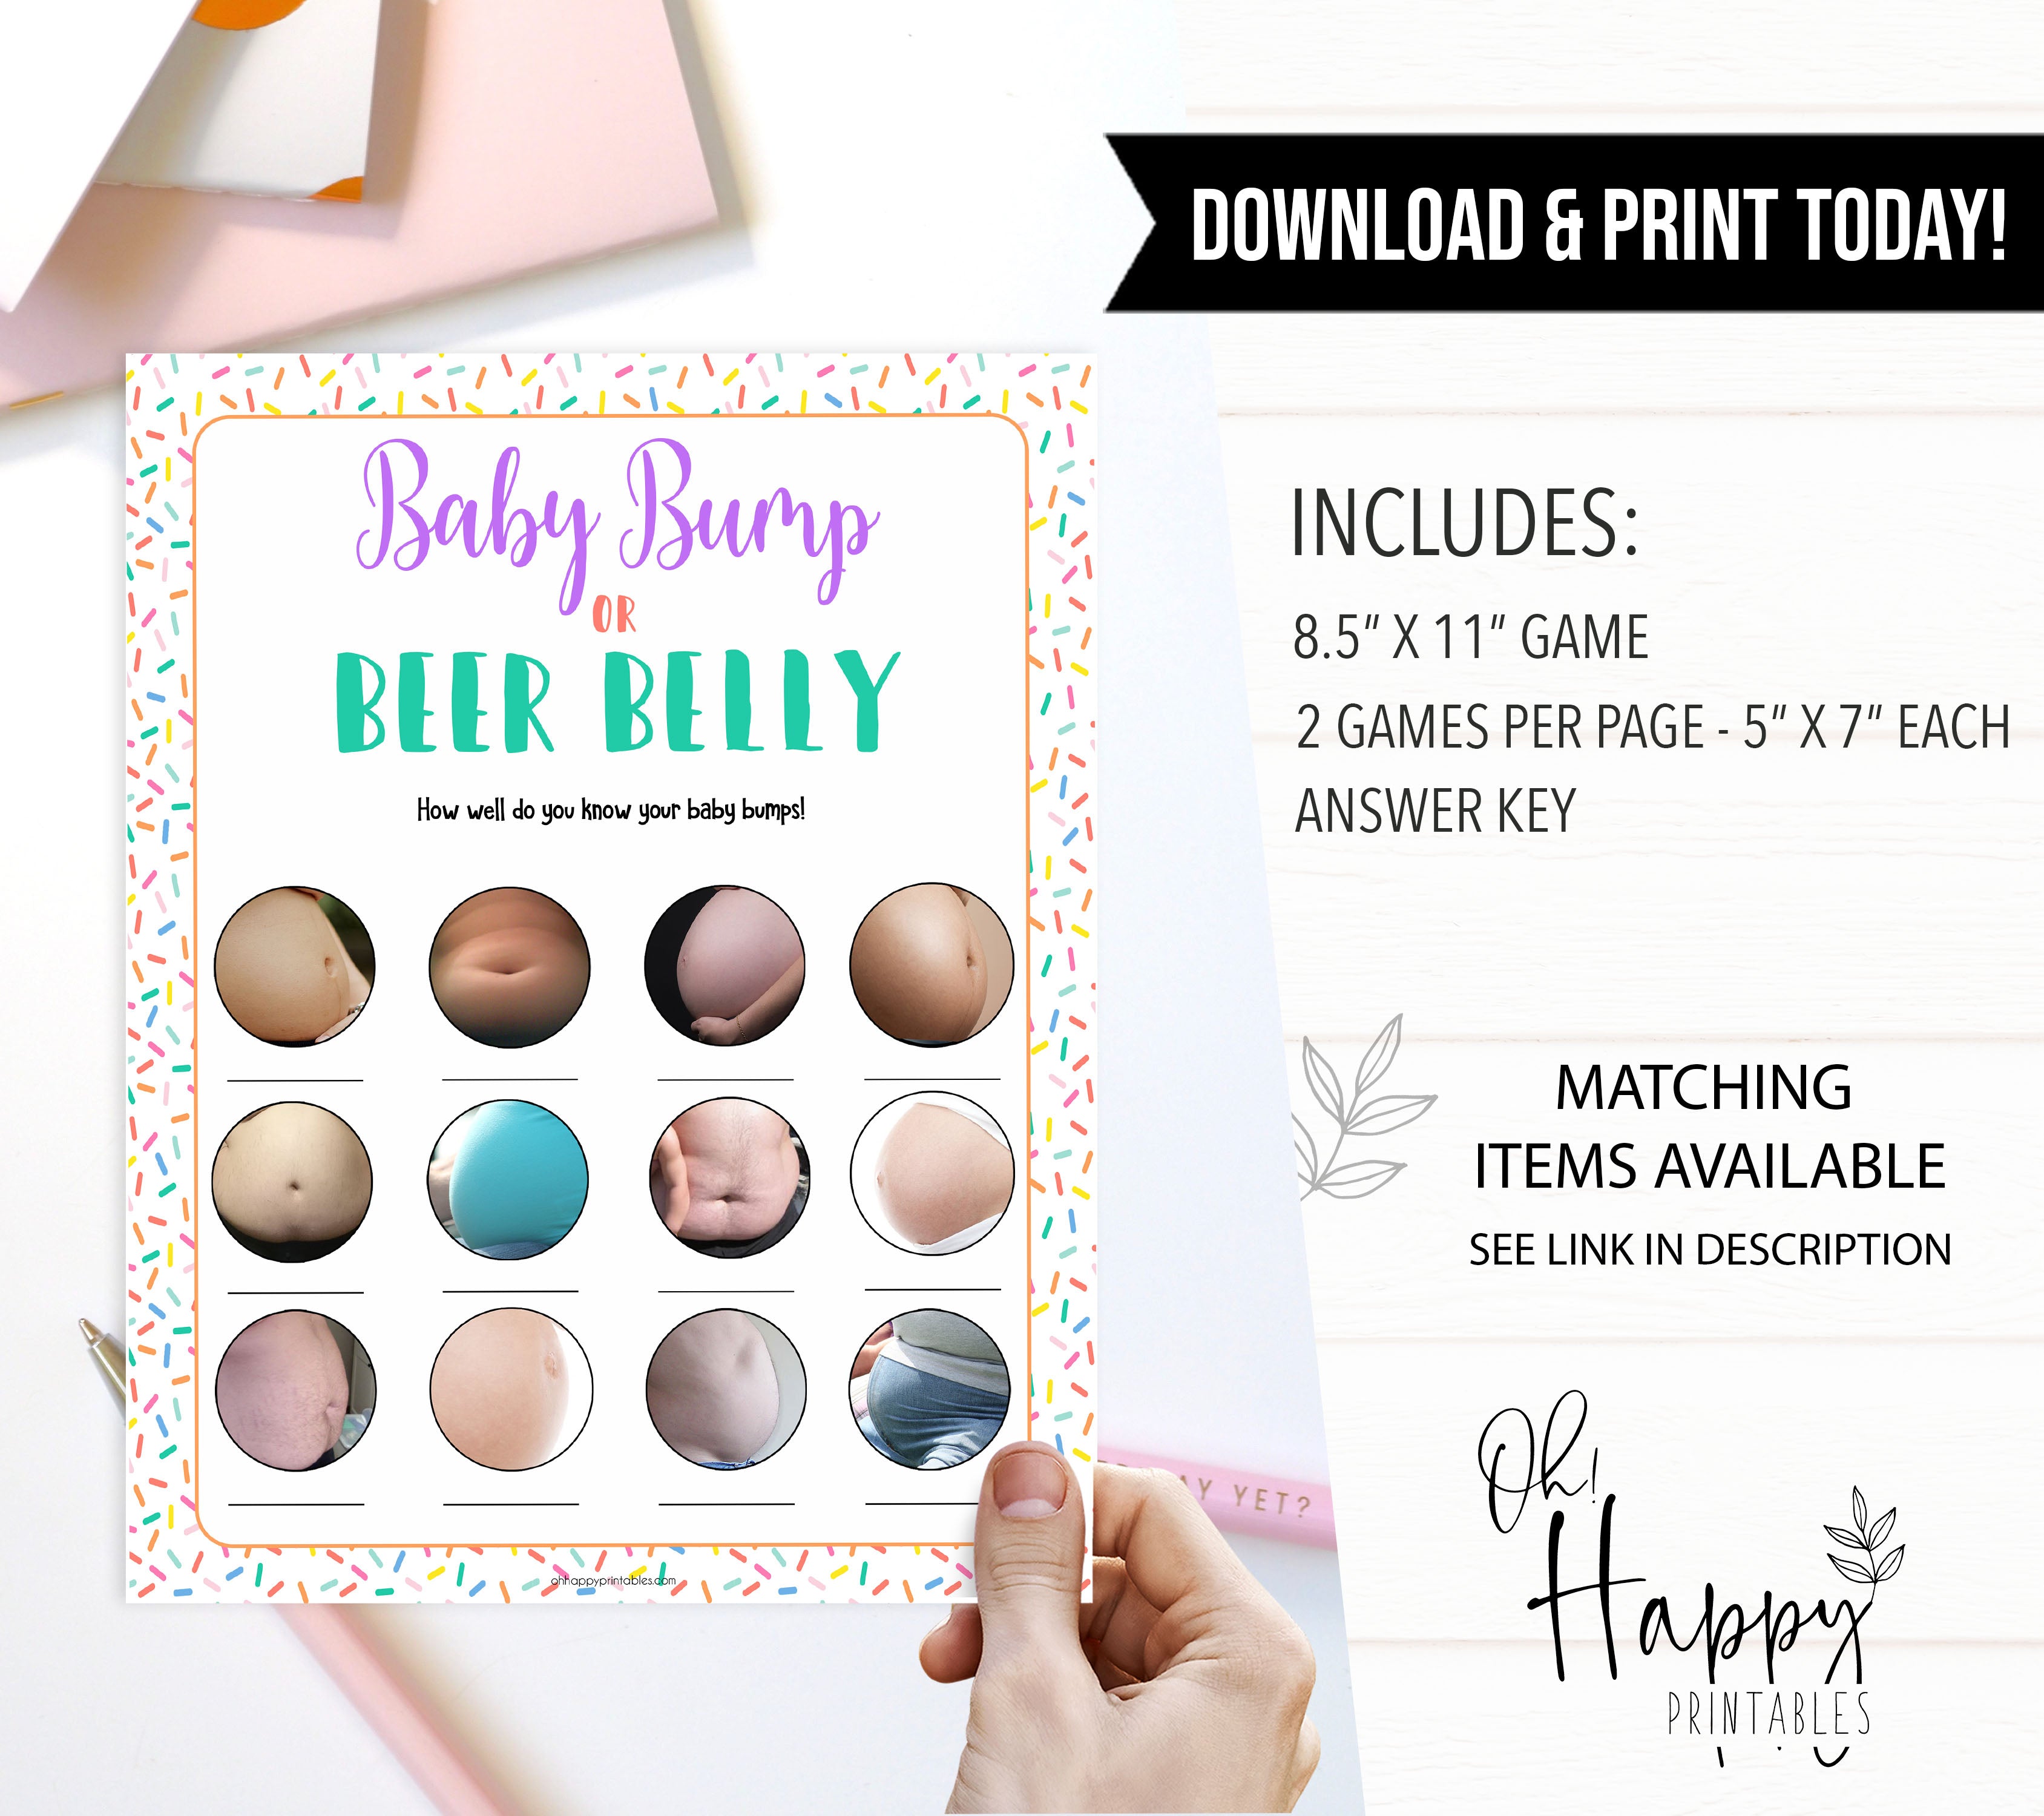 Baby sprinkle games, baby bump or beer belly game, printable baby games, baby shower games, baby spring theme, popular baby games, fun baby games, baby shower ideas